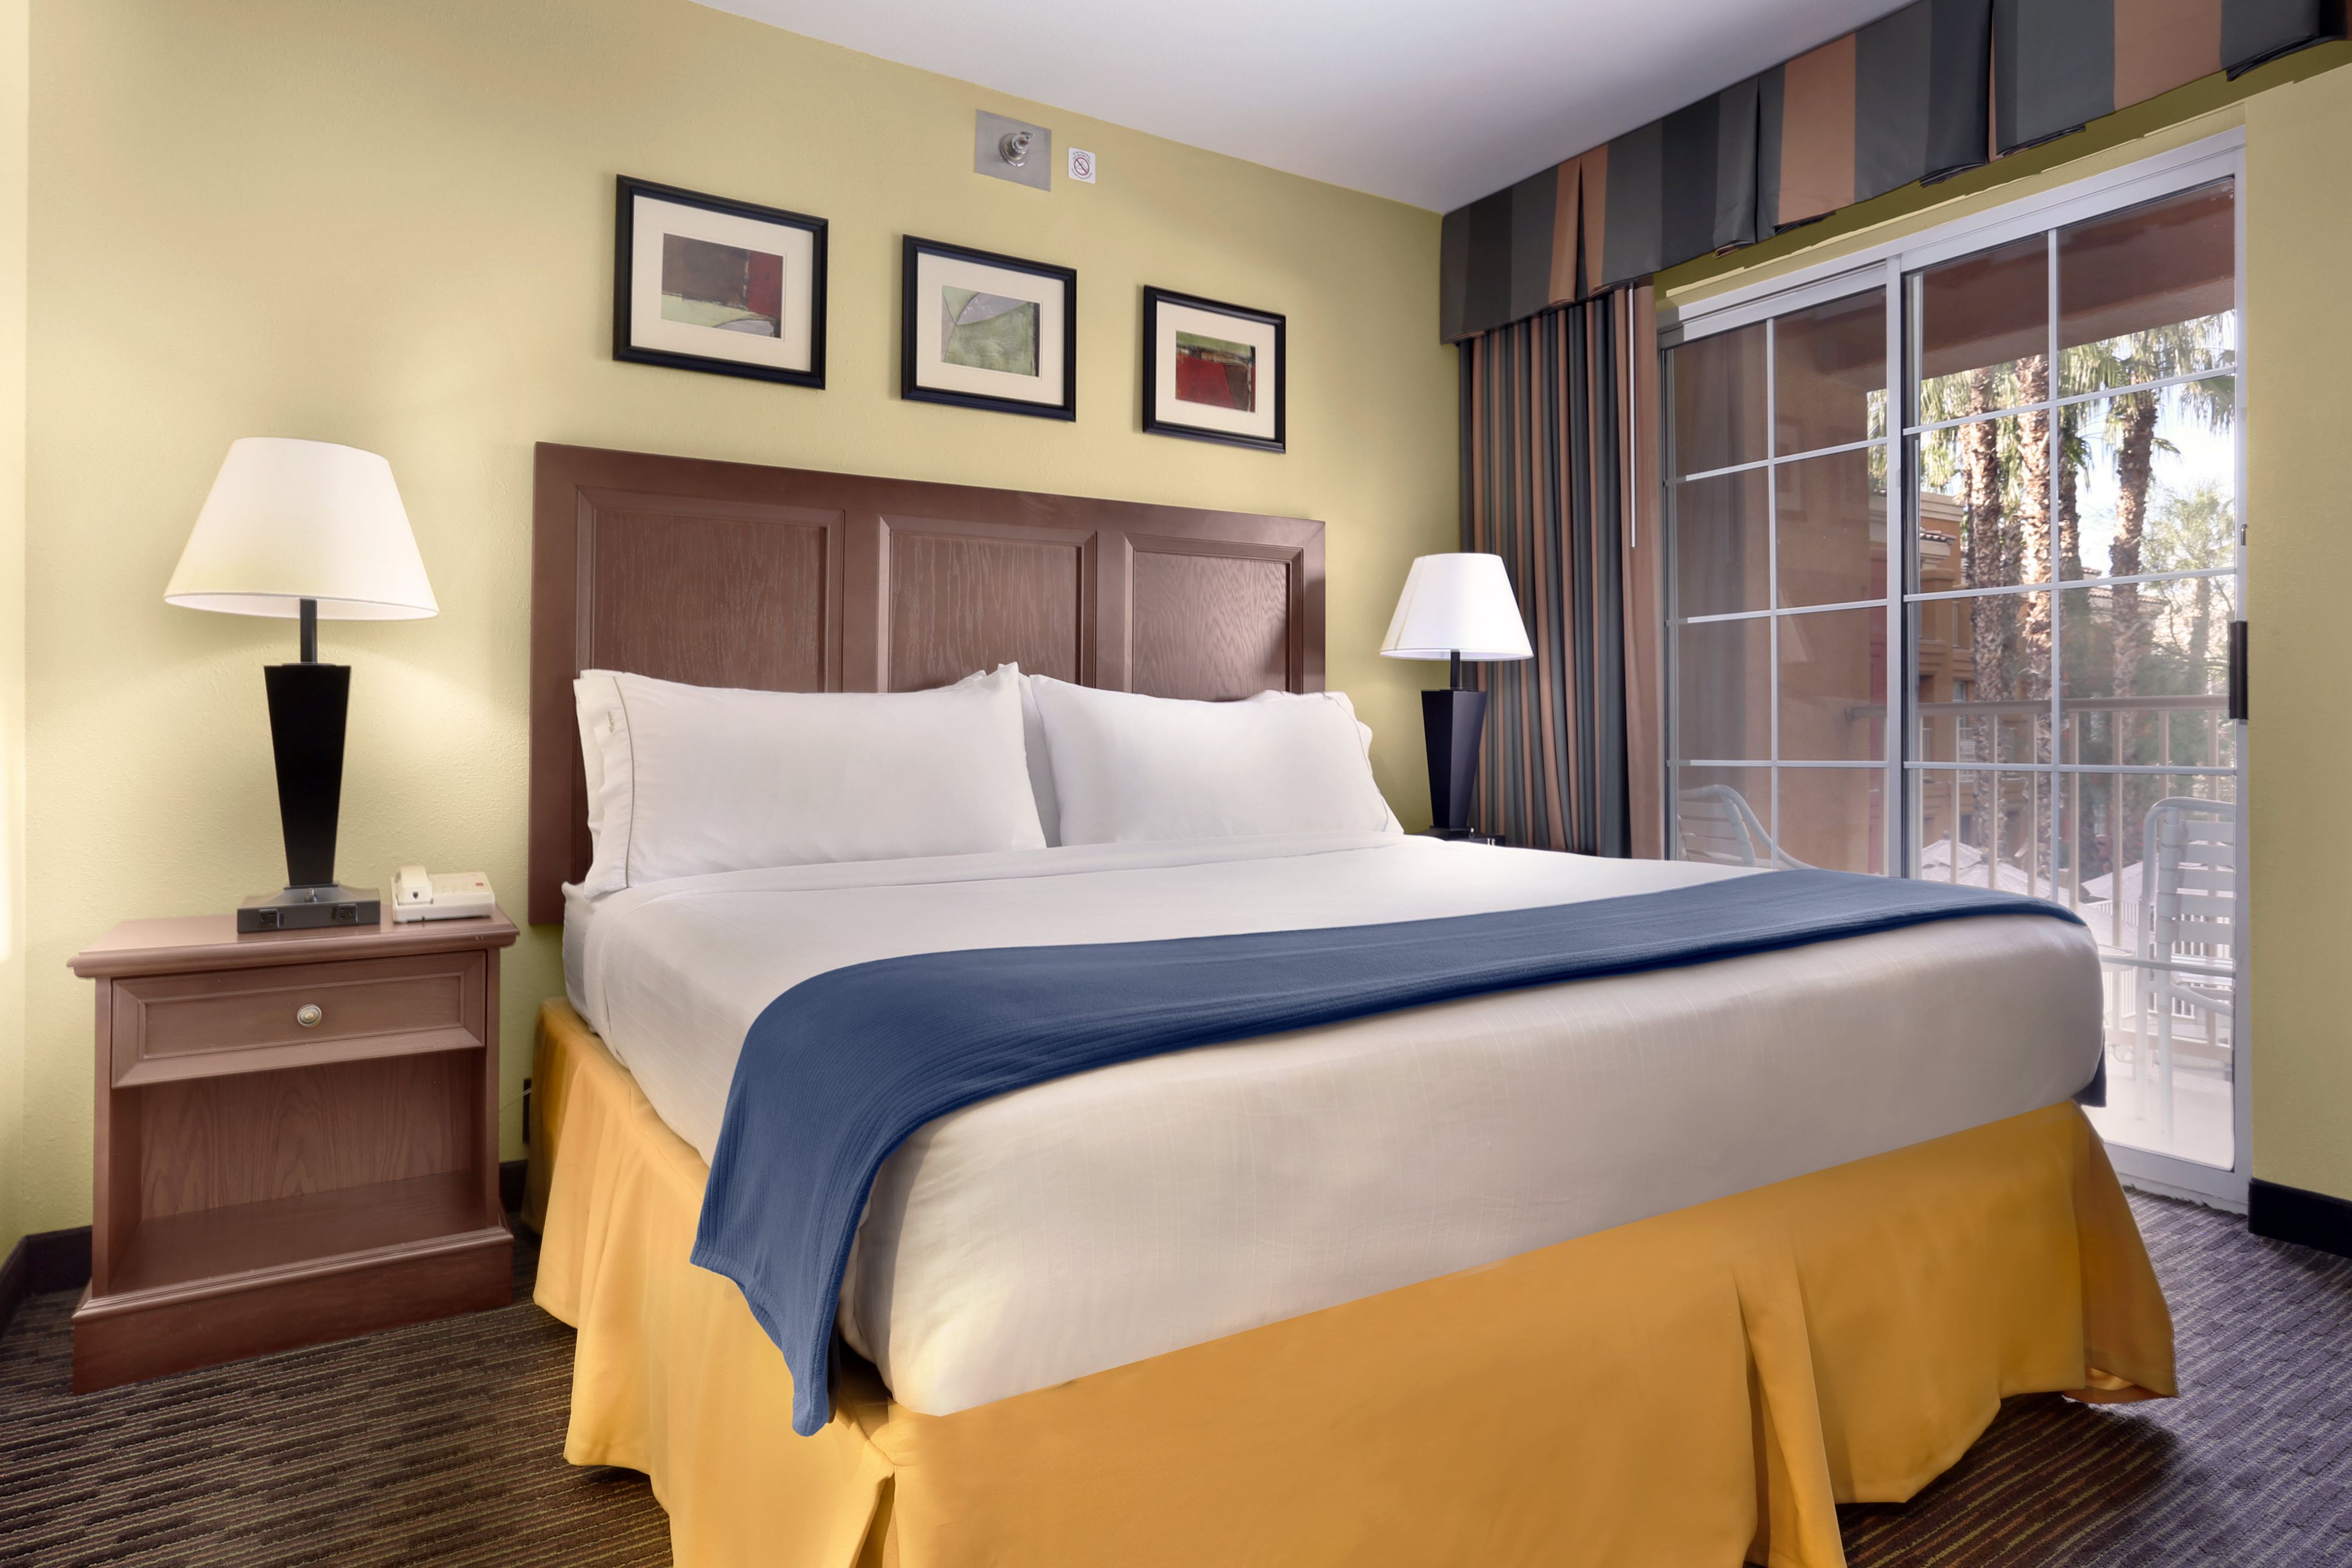 Pet Friendly Holiday Inn Express & Suites Scottsdale - Old Town in Scottsdale, Arizona